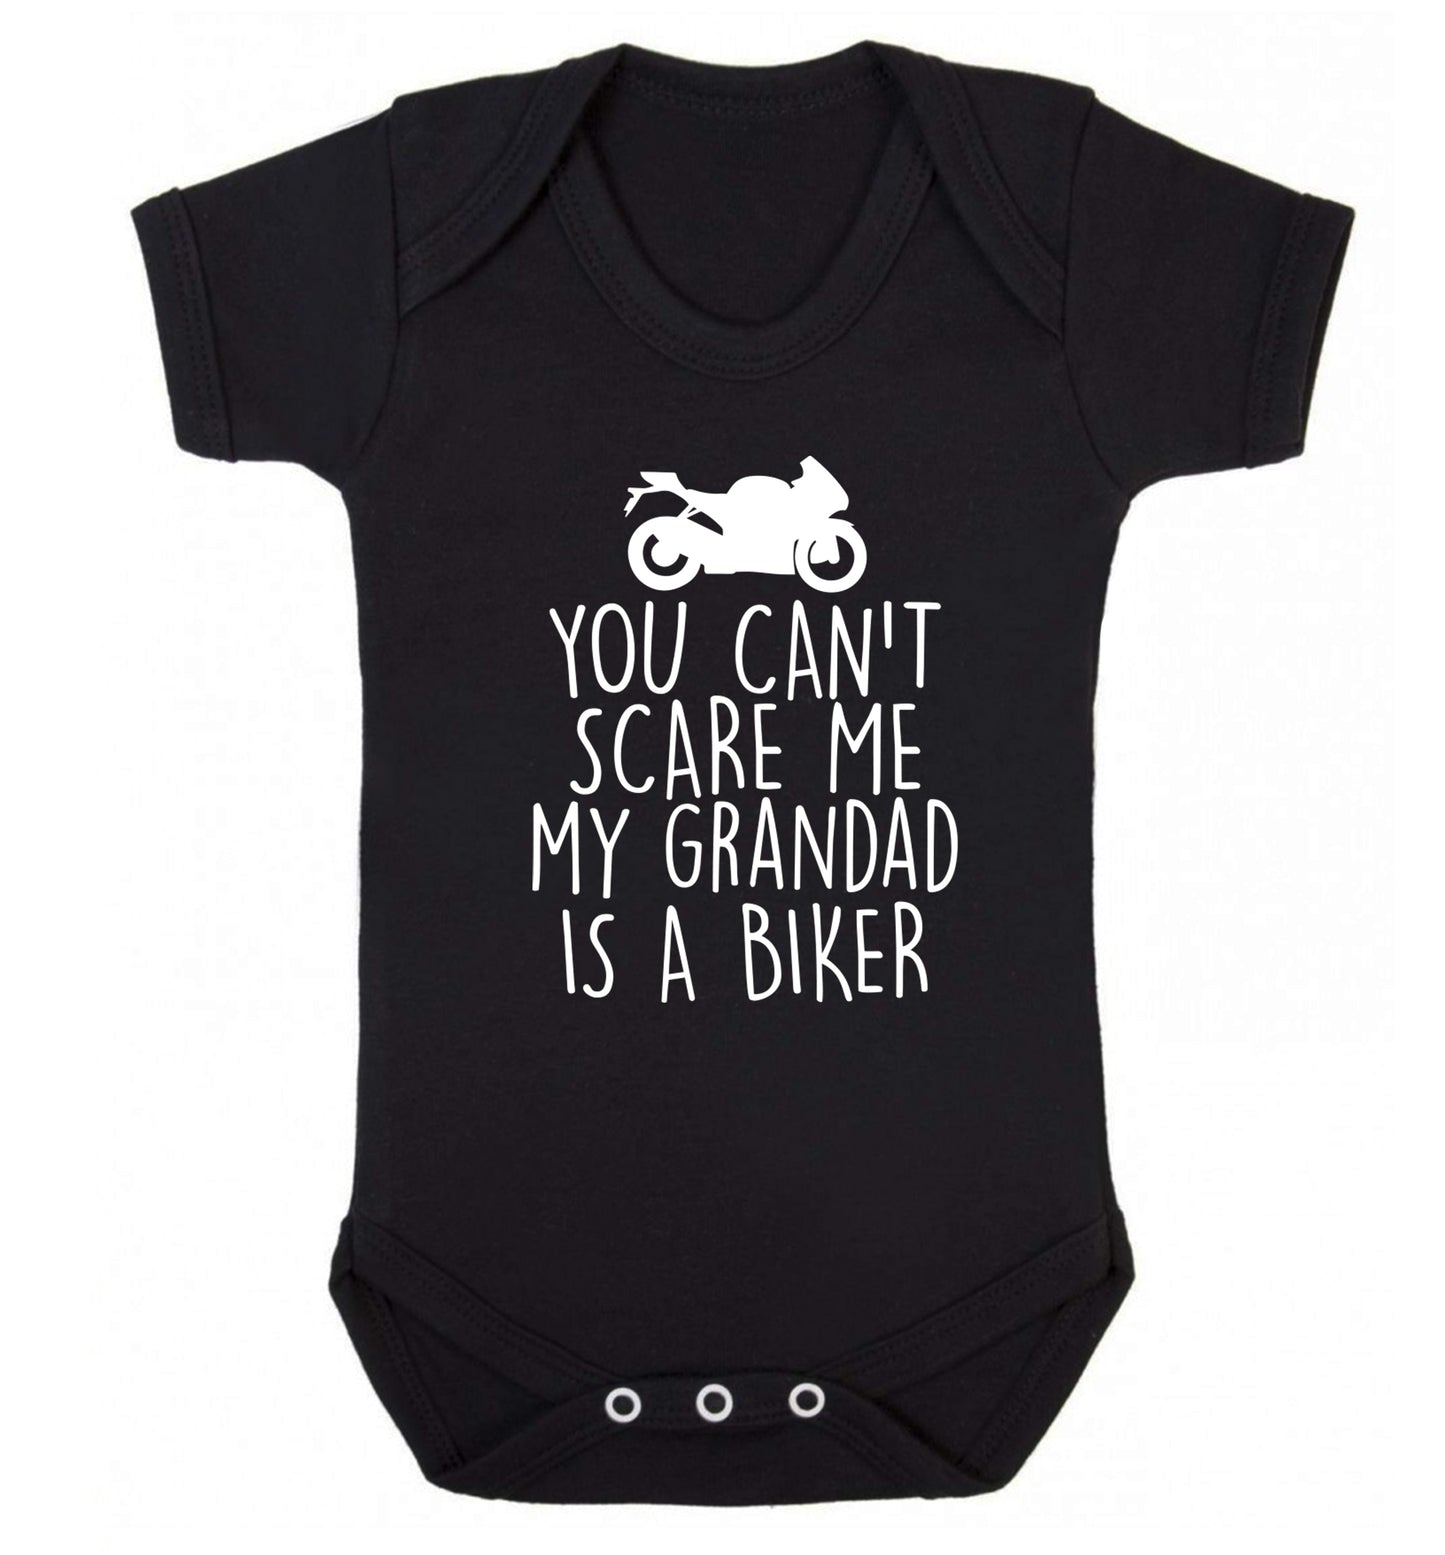 You can't scare me my grandad is a biker Baby Vest black 18-24 months